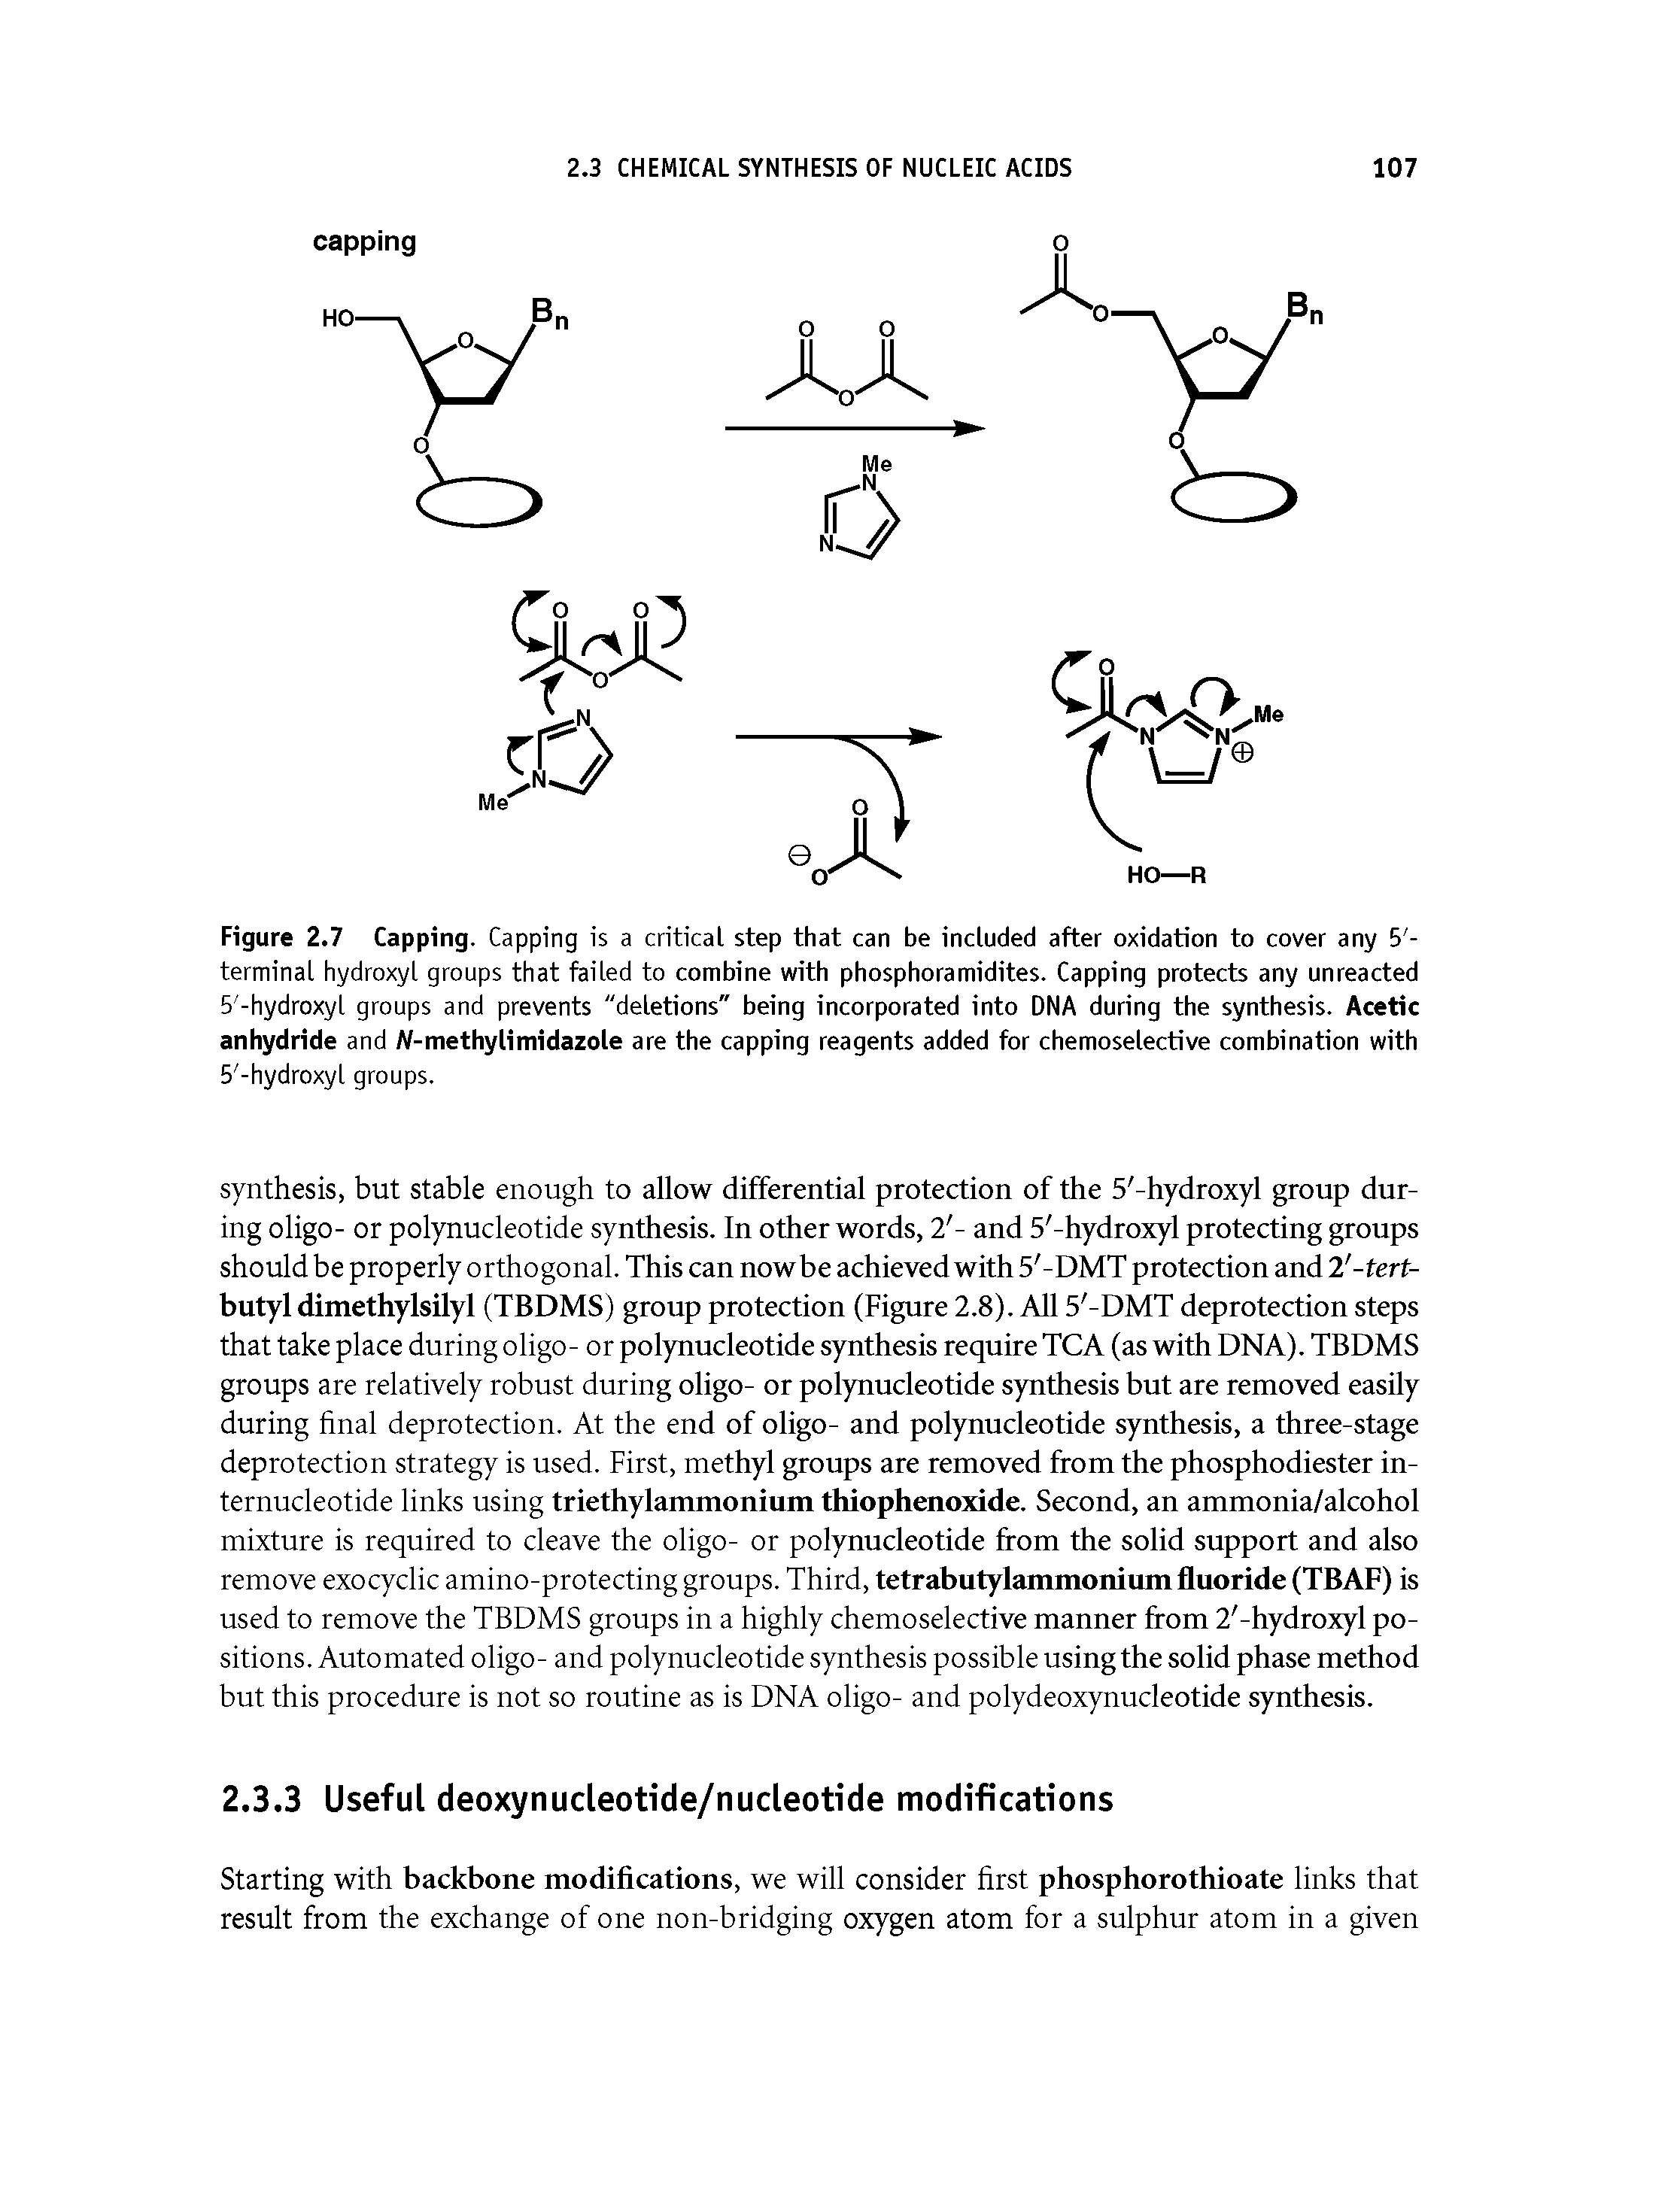 Figure 2.7 Capping. Capping is a critical step that can be included after oxidation to cover any 5 -terminal hydroxyl groups that failed to combine with phosphoramidites. Capping protects any unreacted 5 -hydroxyl groups and prevents "deletions" being incorporated into DNA during the synthesis. Acetic anhydride and Al-methylimidazole are the capping reagents added for chemoselective combination with...